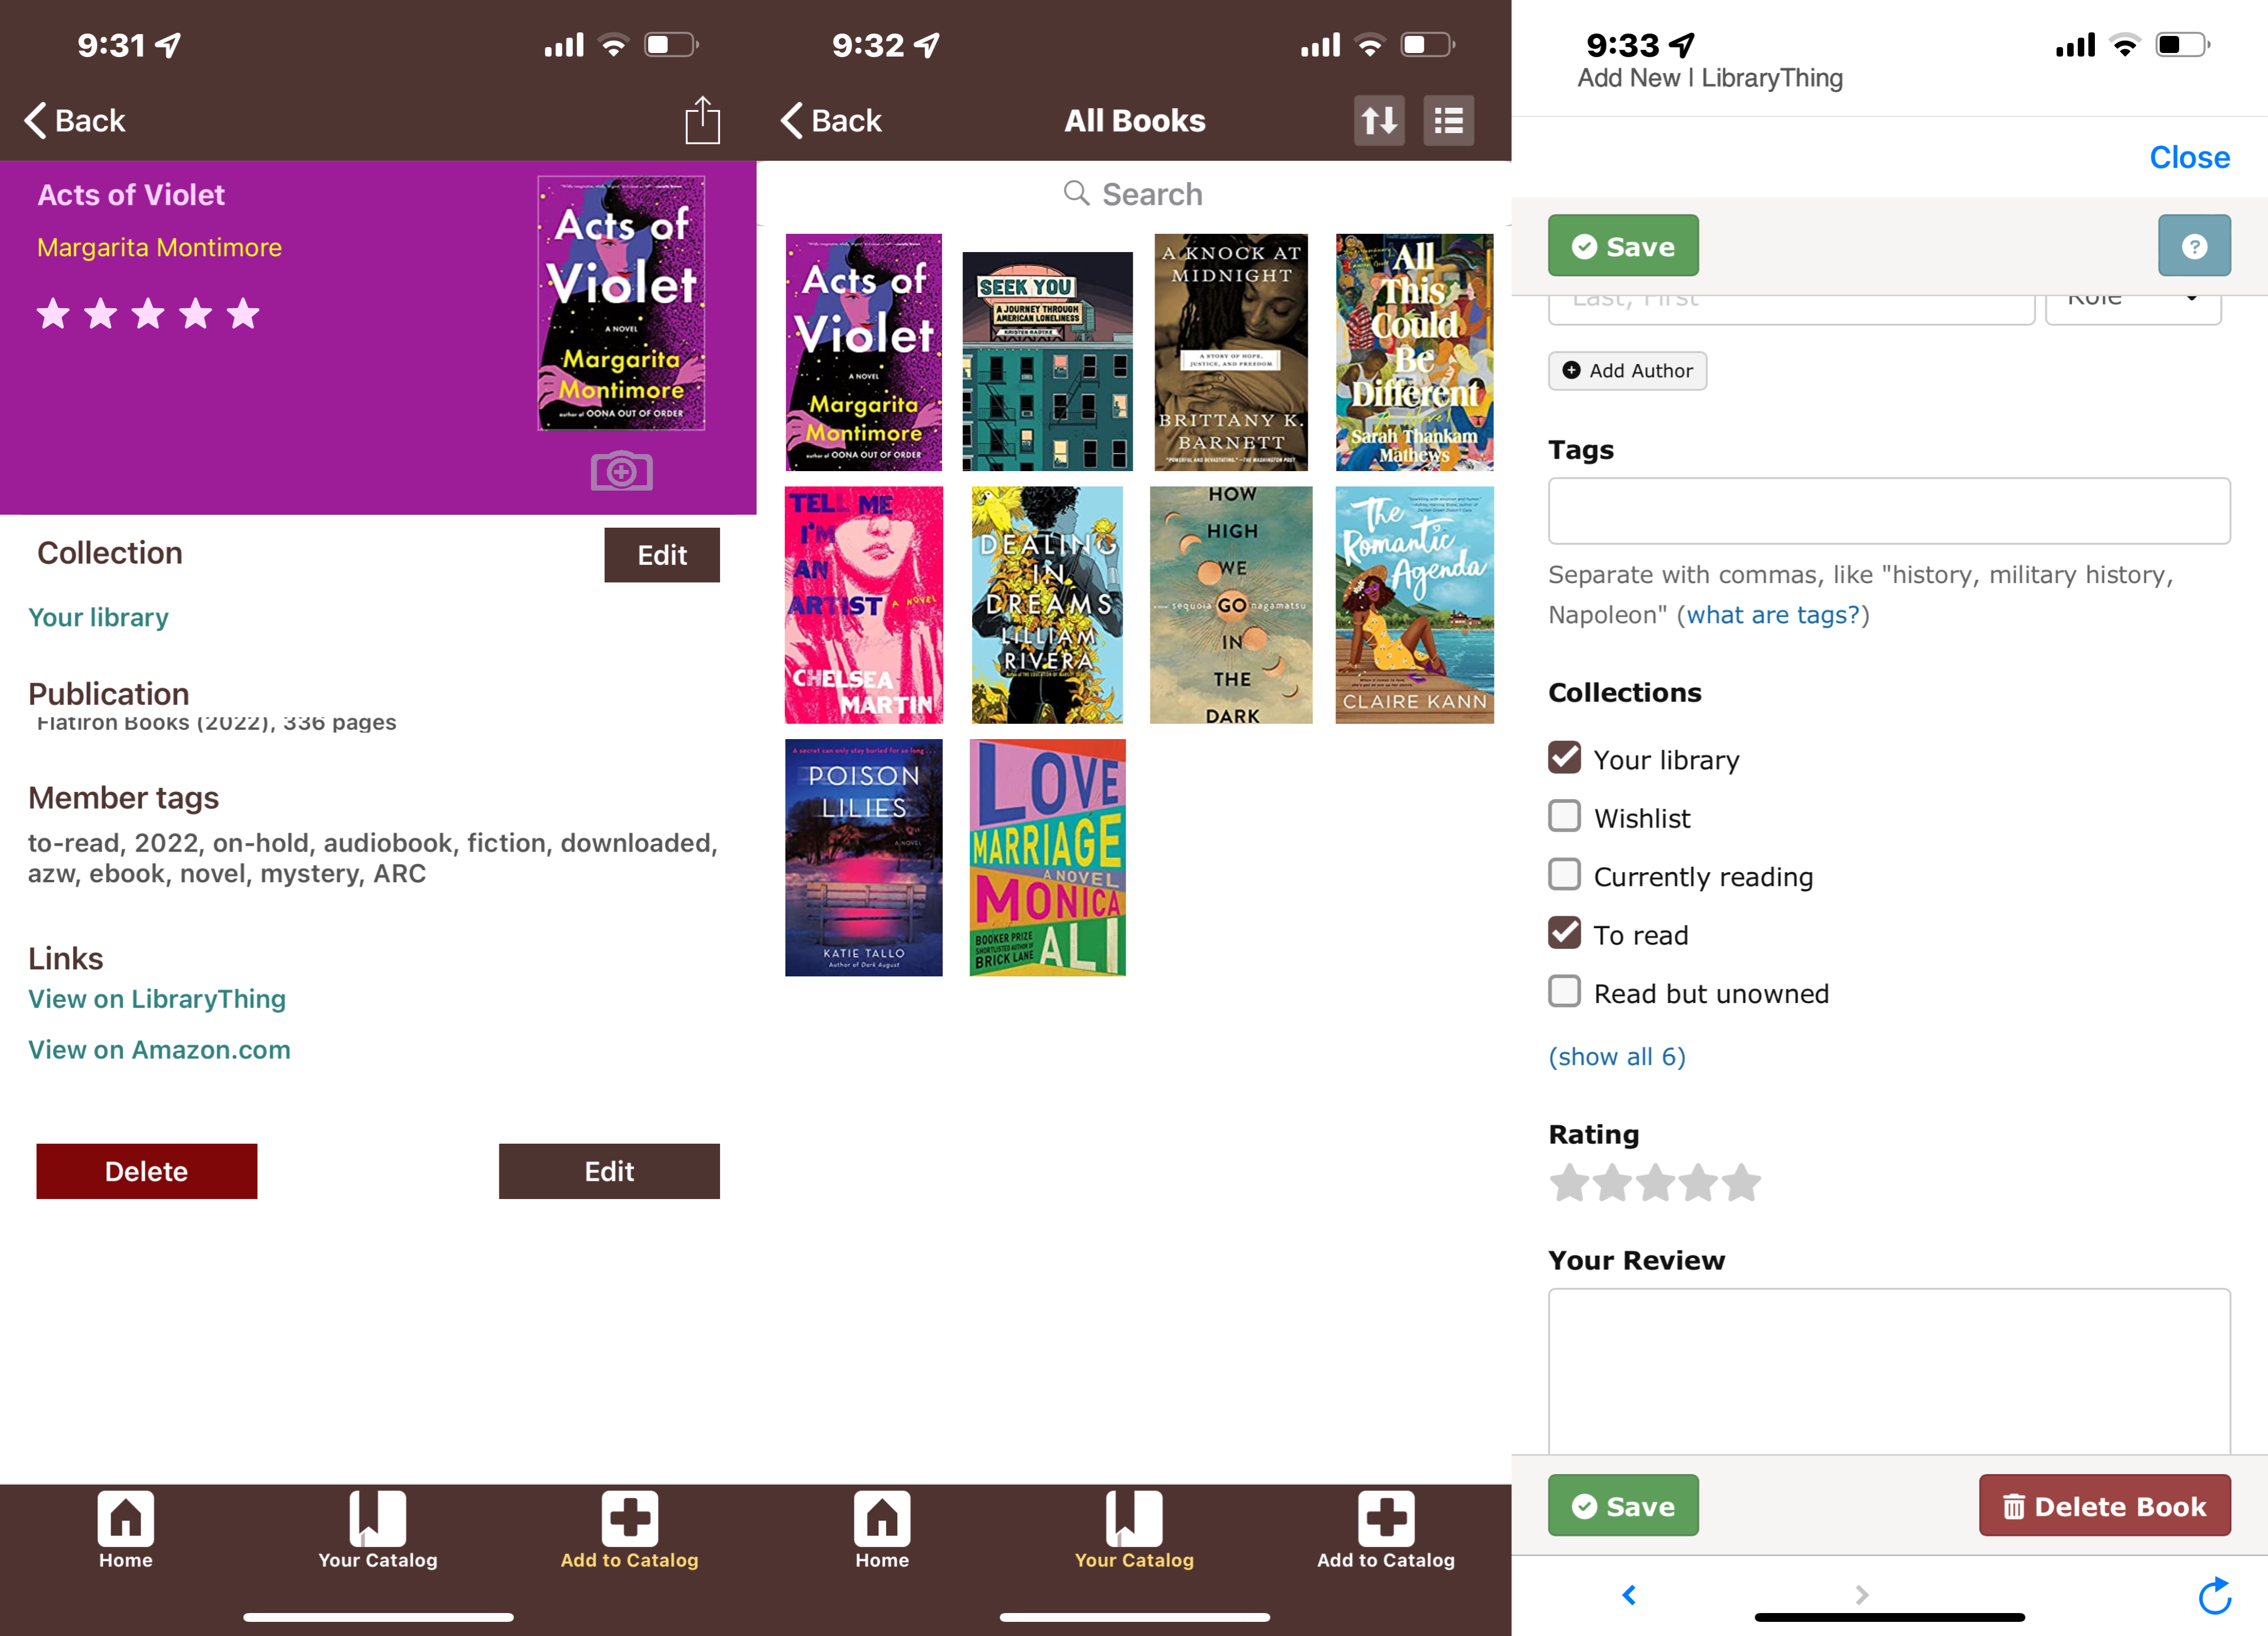 3 screenshots from the Library Thing app showing a book's main catalog page, the general library home page, and the shelf system. 